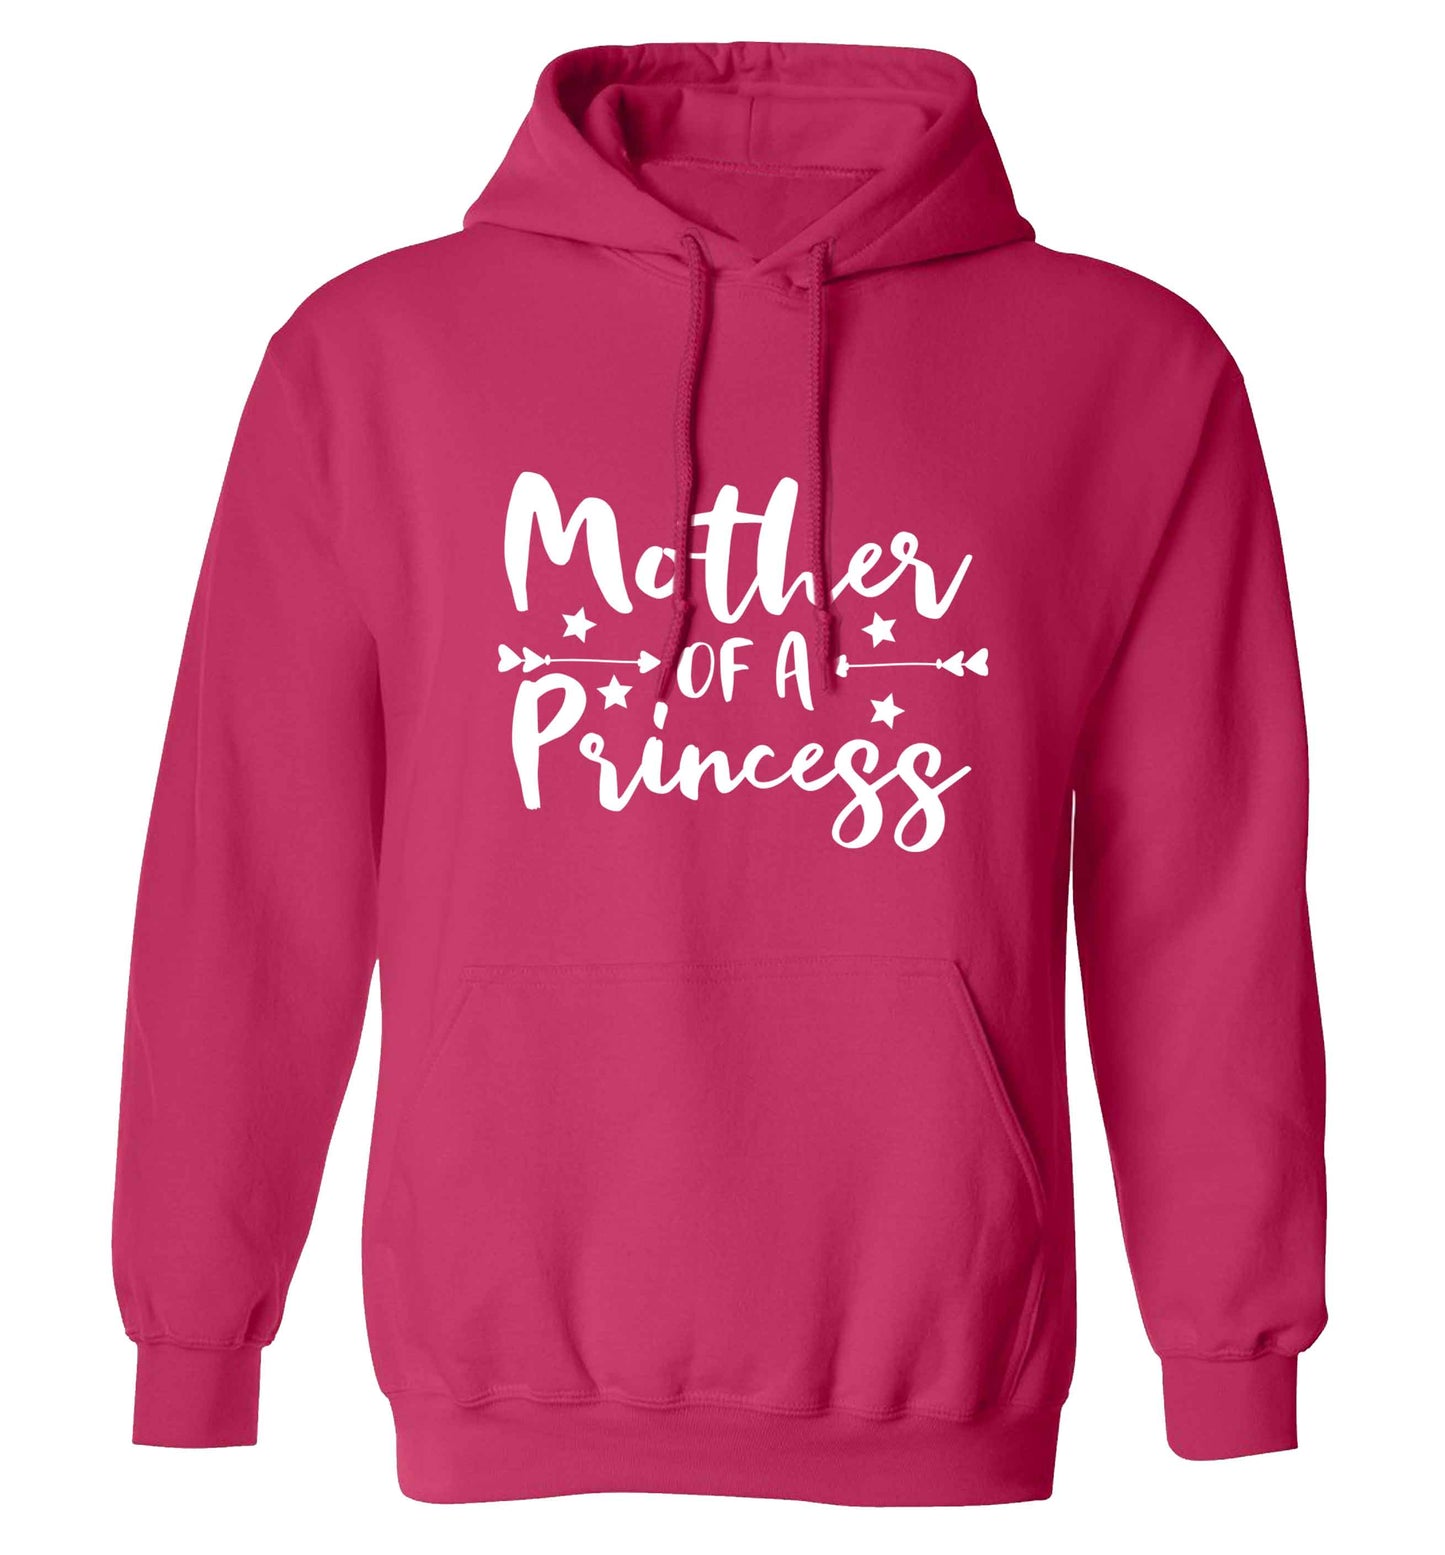 Mother of a princess adults unisex pink hoodie 2XL